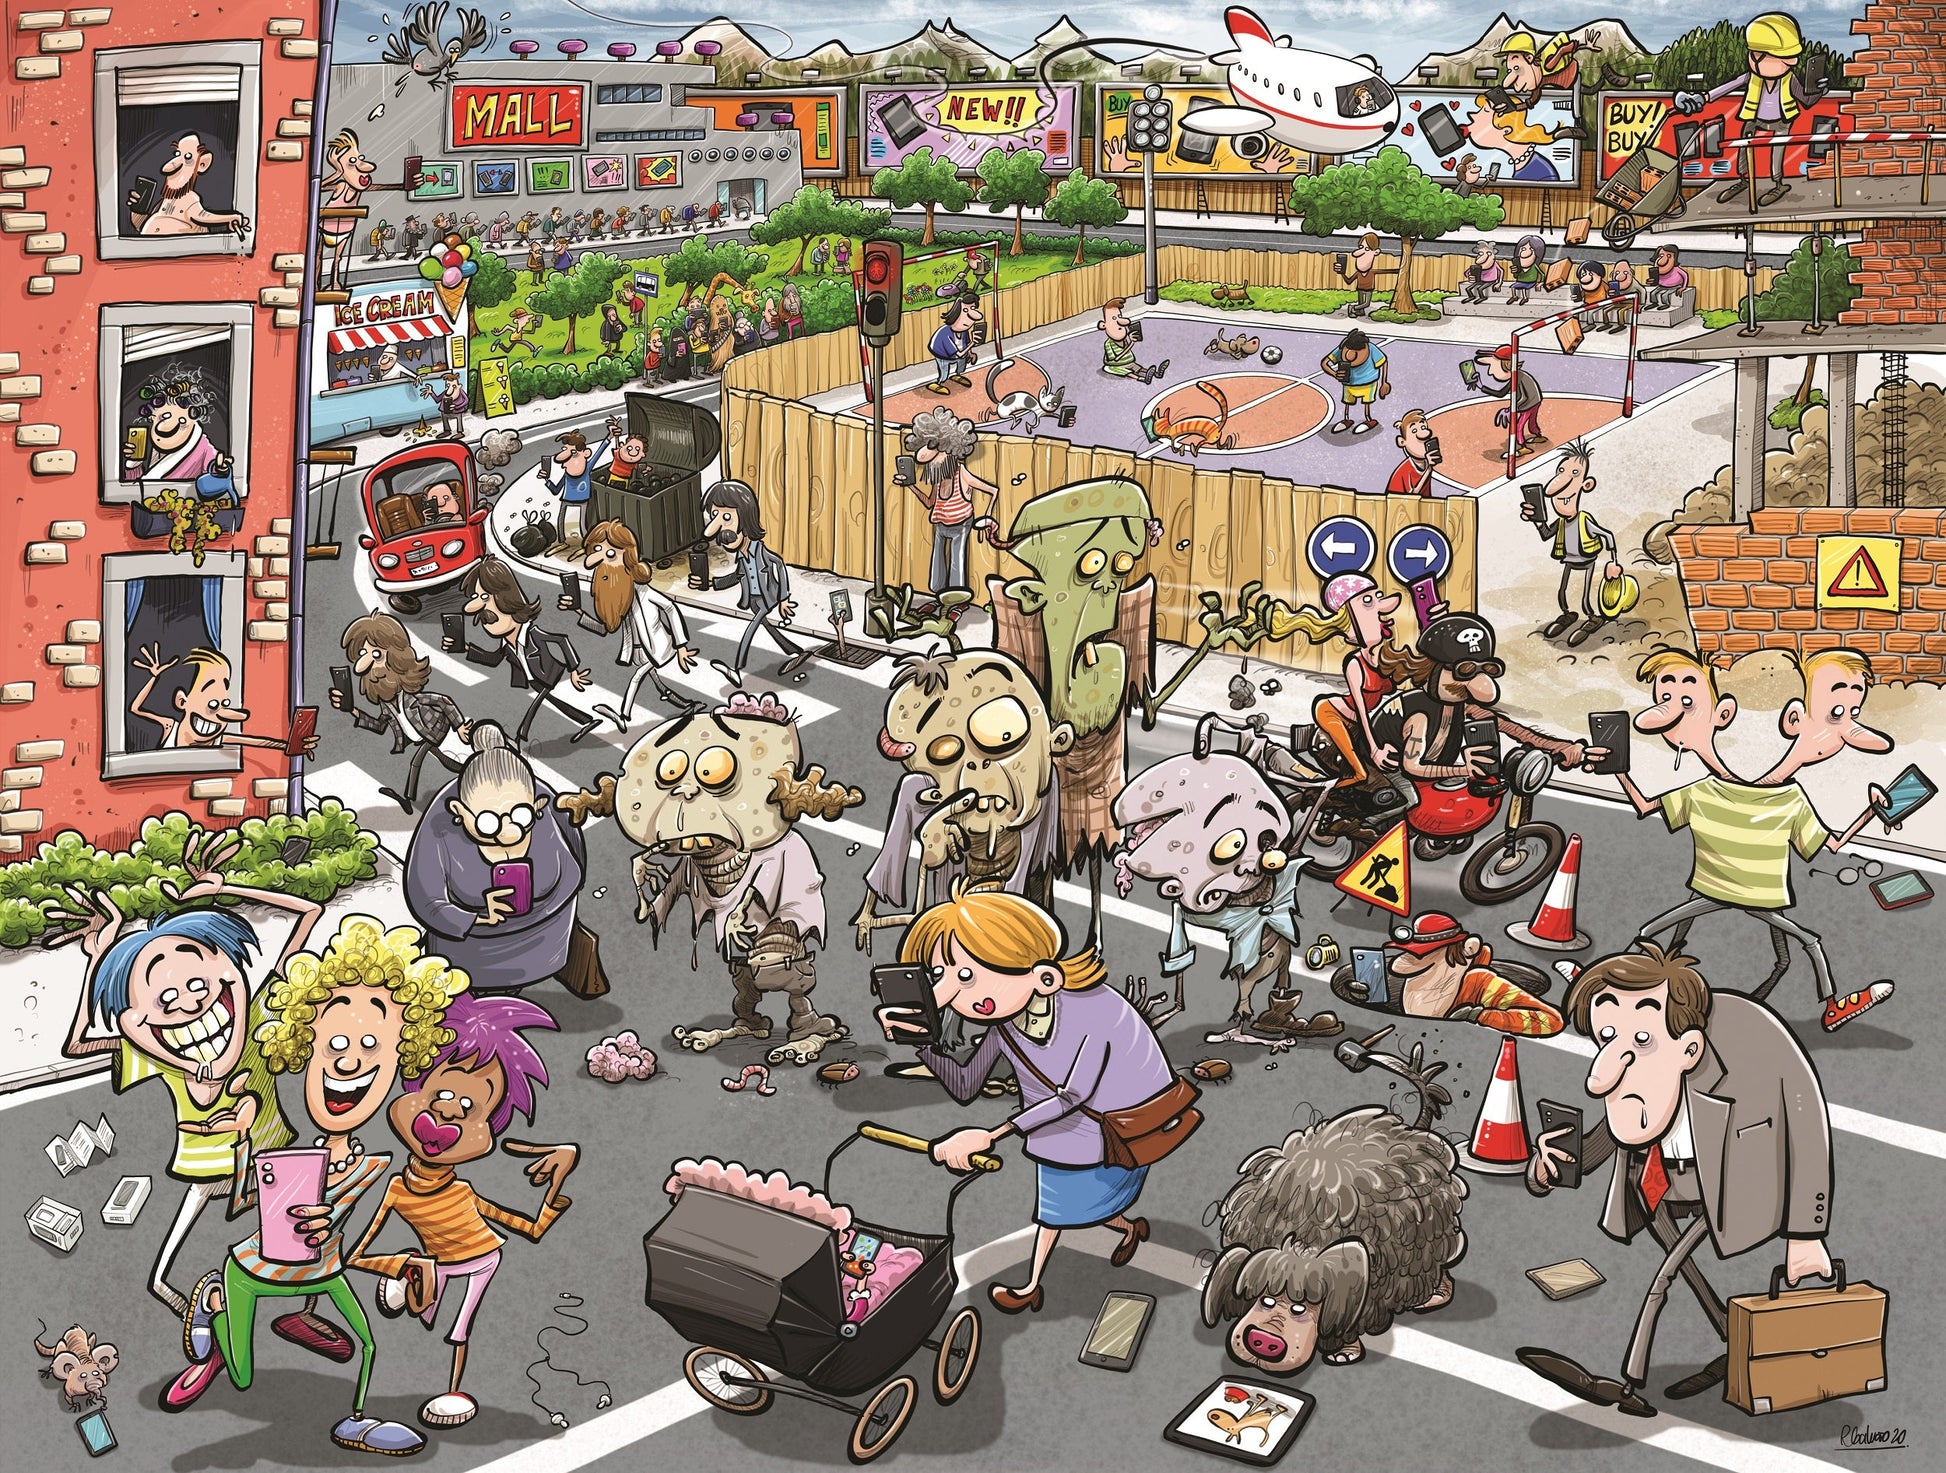 Chaos at Zombieland 1000 or 500 Piece Jigsaw Puzzle - Chaos no. 22